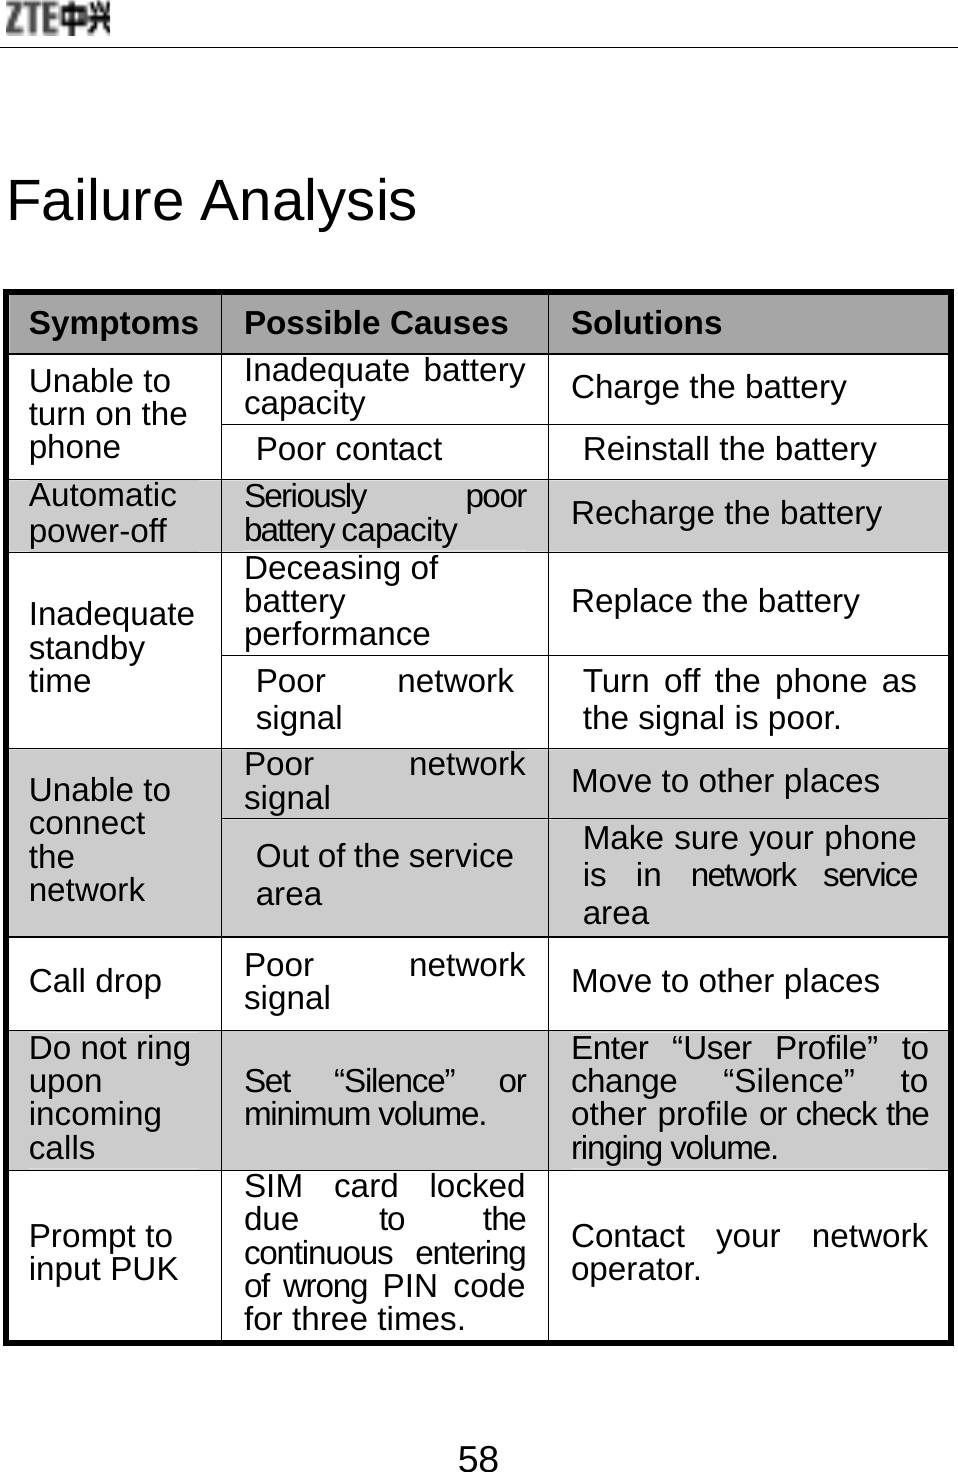  58 Failure Analysis Symptoms  Possible Causes  Solutions Unable to turn on the phone Inadequate battery capacity  Charge the battery Poor contact  Reinstall the battery Automatic power-off  Seriously poor battery capacity  Recharge the battery Inadequate standby time Deceasing of battery performance   Replace the battery Poor network signal  Turn off the phone as the signal is poor. Unable to connect the network  Poor network signal  Move to other places Out of the service area Make sure your phone is in network service area Call drop  Poor network signal  Move to other places Do not ring upon incoming calls Set “Silence” or minimum volume. Enter “User Profile” to change “Silence” to other profile or check the ringing volume. Prompt to input PUK SIM card locked due to the continuous entering of wrong PIN code for three times. Contact your network operator.  